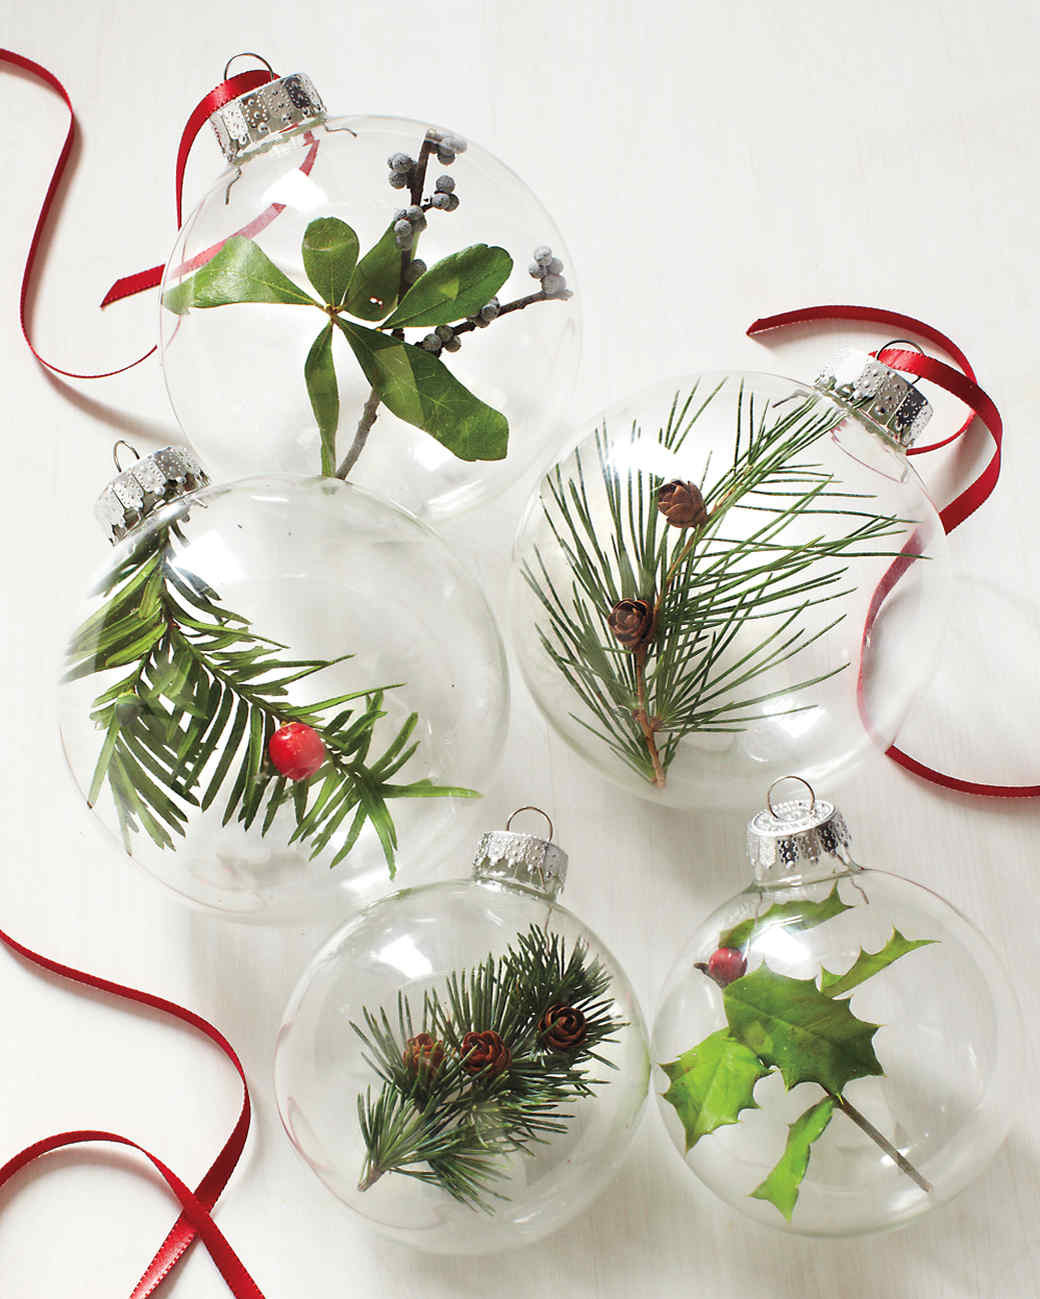 DIY Christmas Tree Decorations
 DIY Christmas Ornament Projects